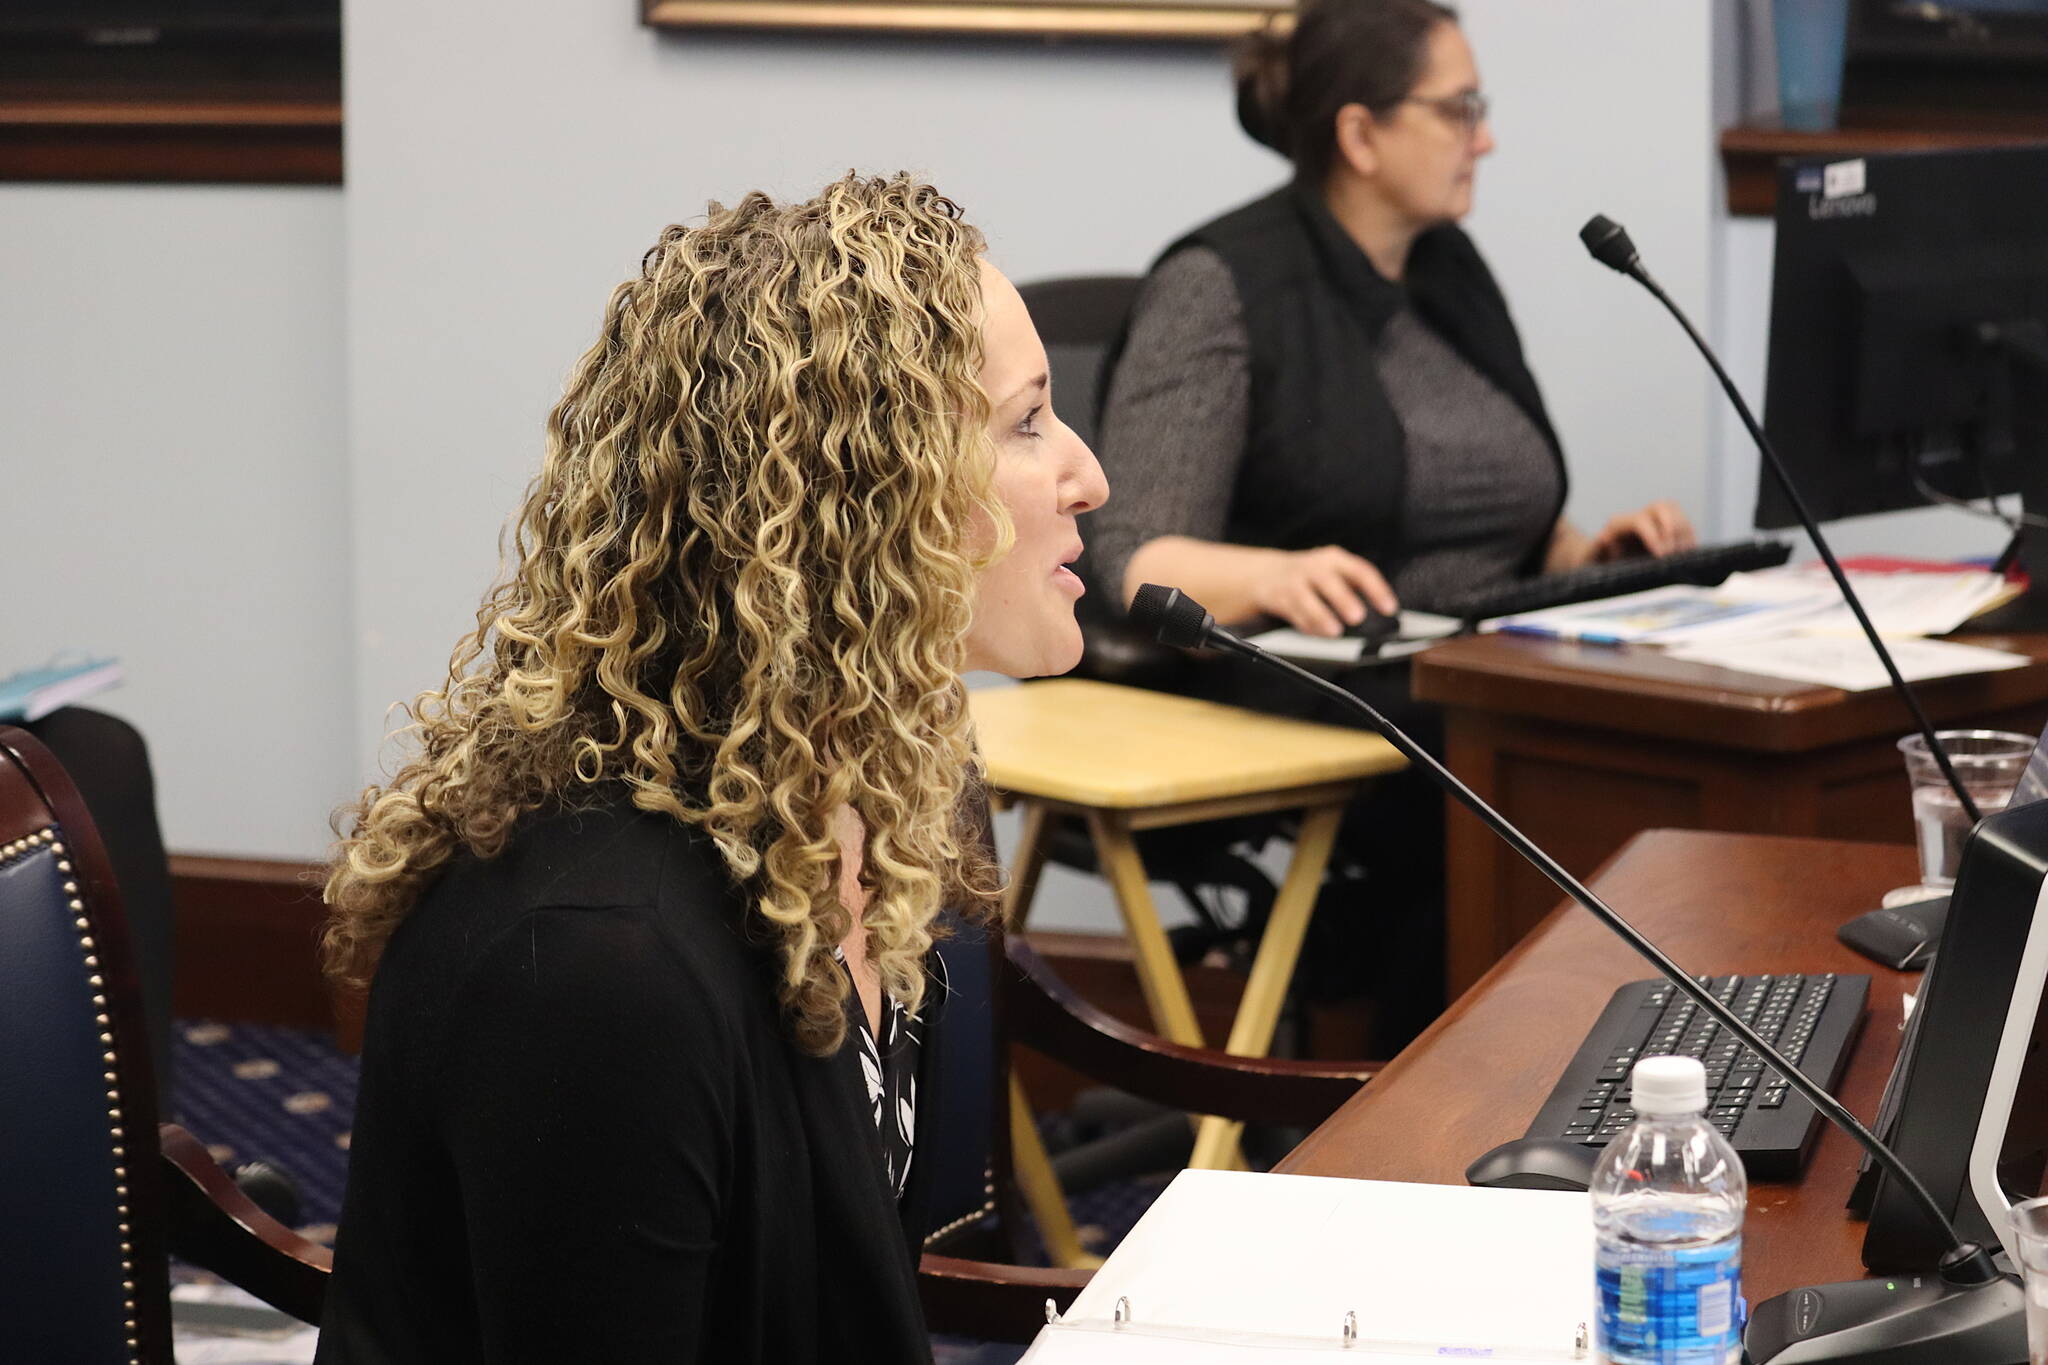 Alaska Department of Health Commissioner Heidi Hedberg provides an overview of the department’s services and ongoing difficulties with its public assistance services to the Senate Health And Resources Committee on Tuesday, Jan. 24, 2023. (Mark Sabbatini / Juneau Empire)